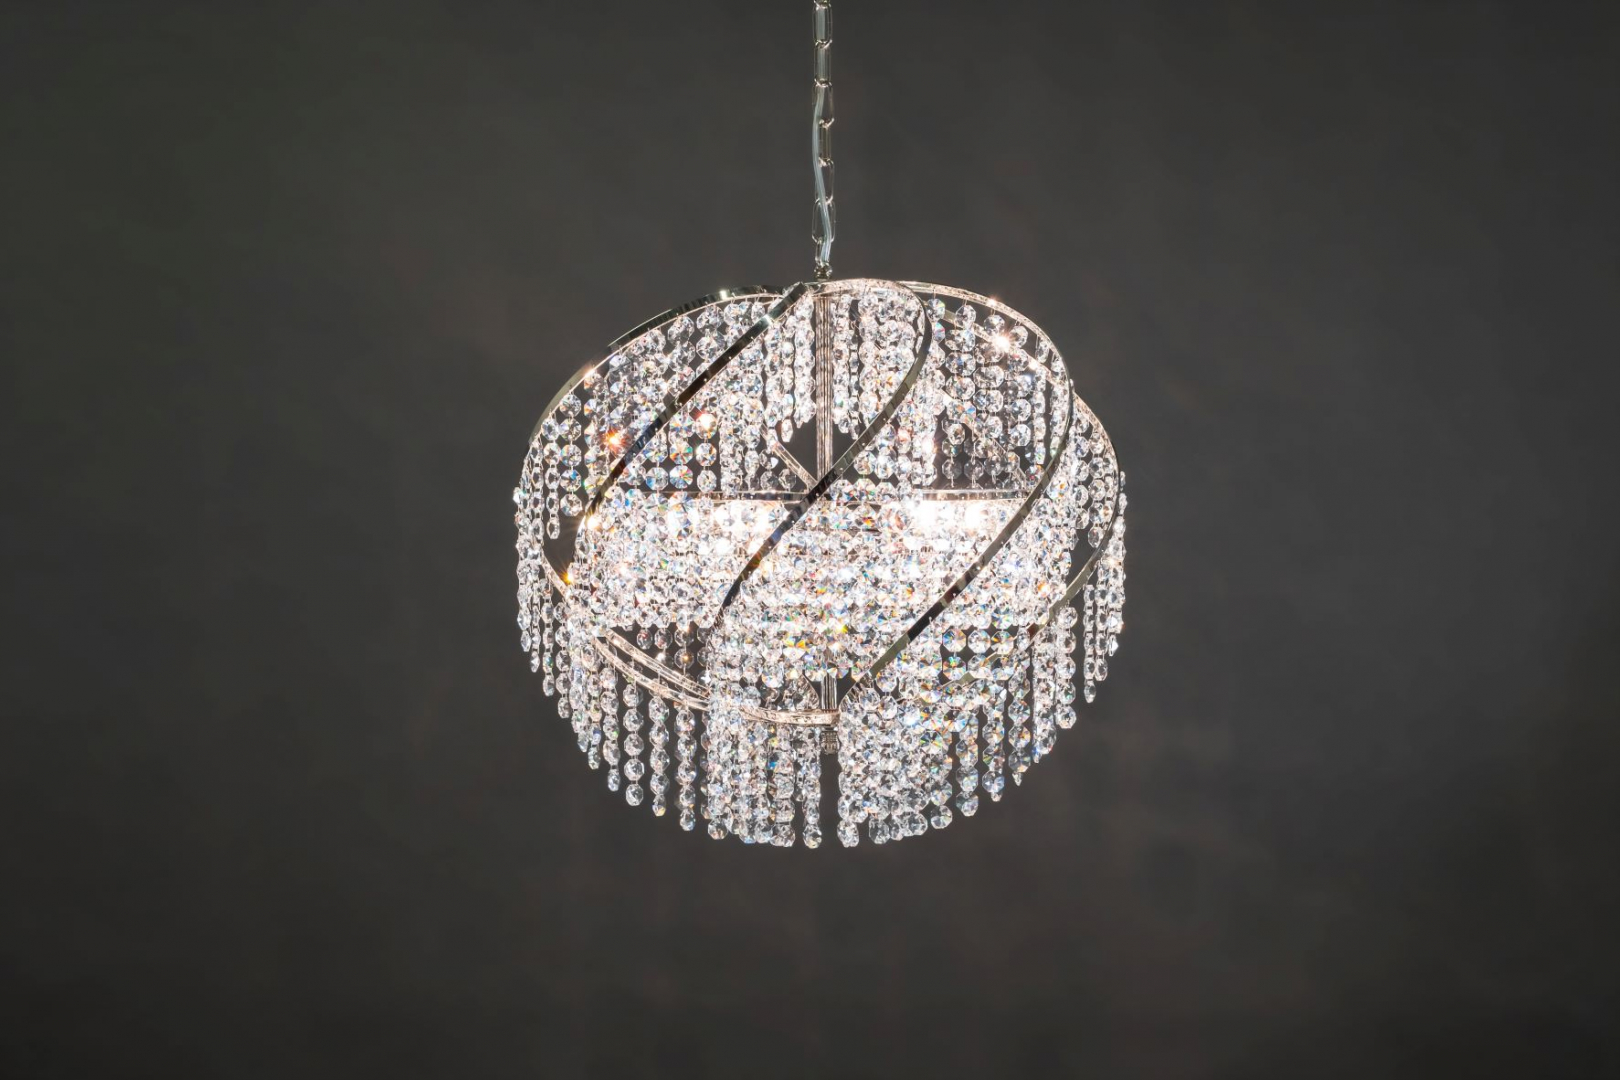 A Chandelier Pallo 1050 "ball" made from genuine crystals. This crystal lamp attracts attention and illuminates the room.